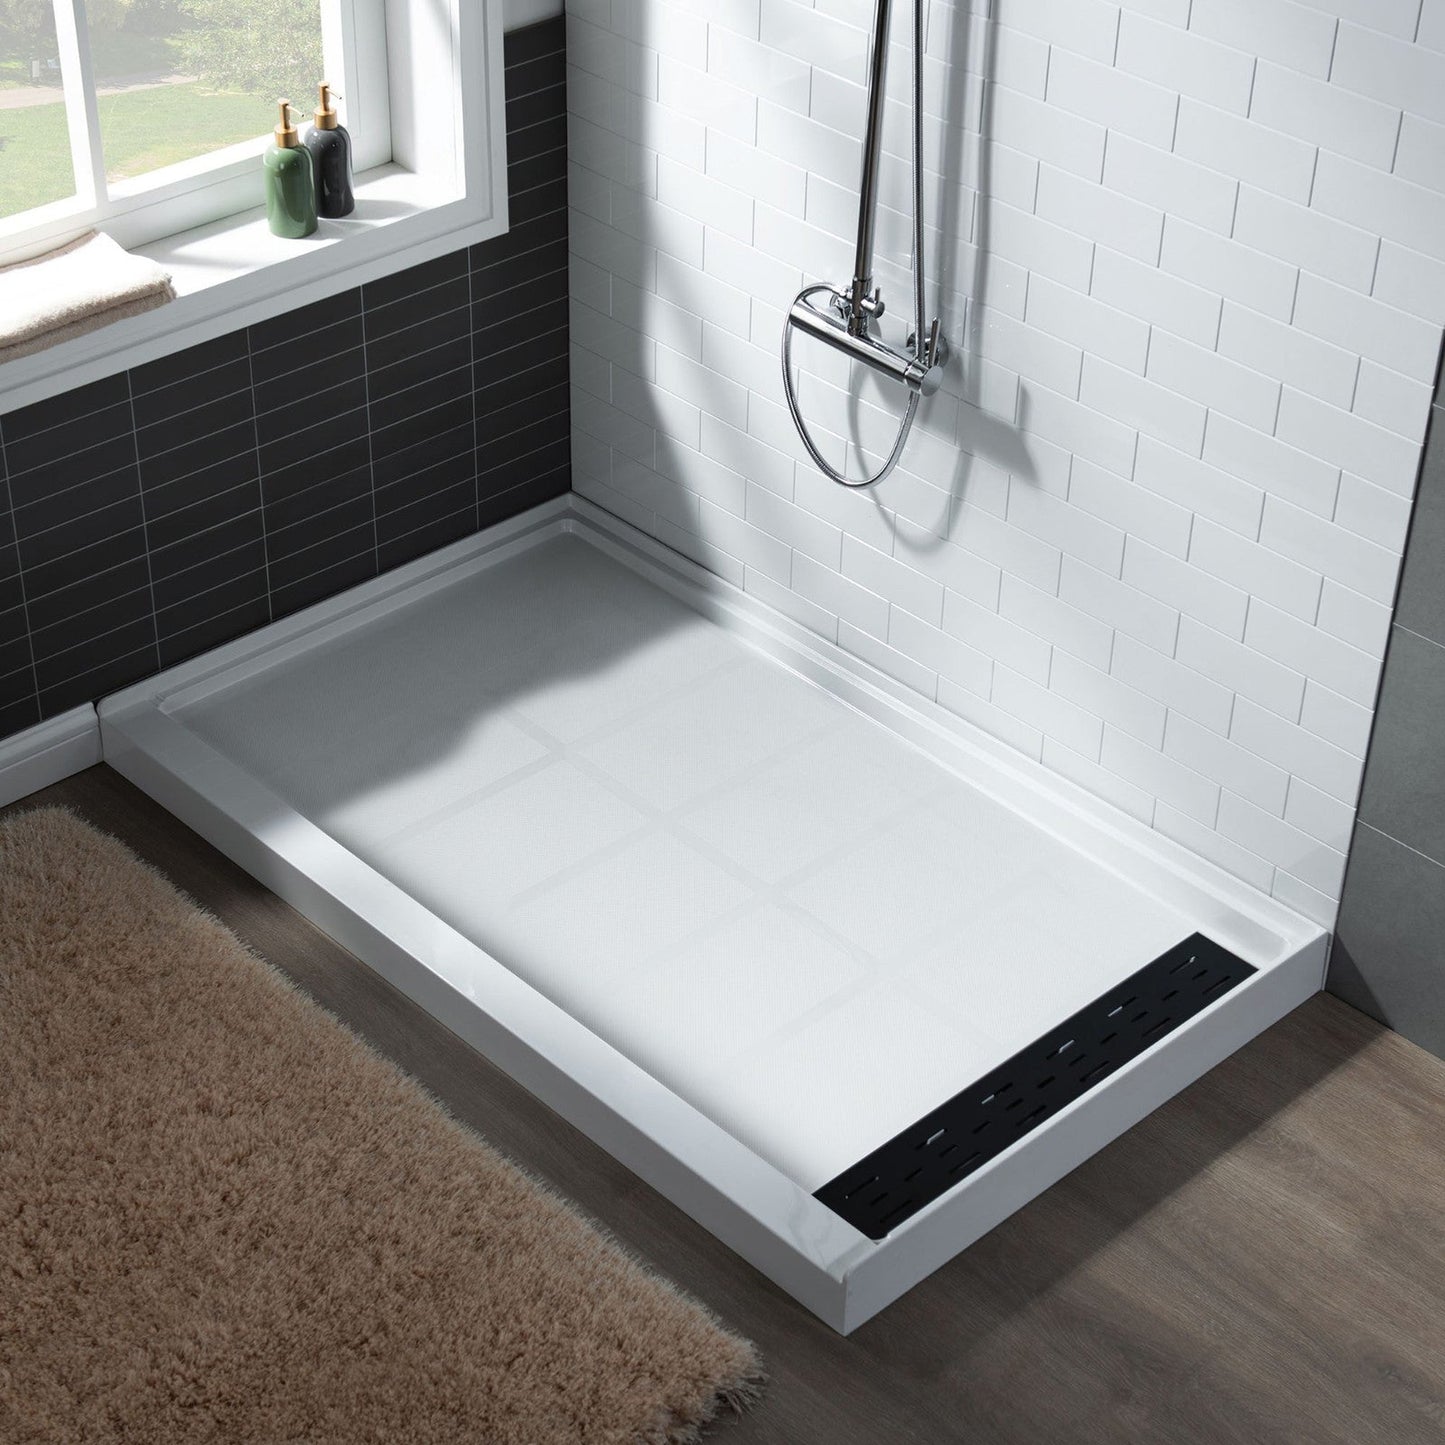 WoodBridge 60" x 34" White Solid Surface Shower Base Right Drain Location With Matte Black Trench Drain Cover